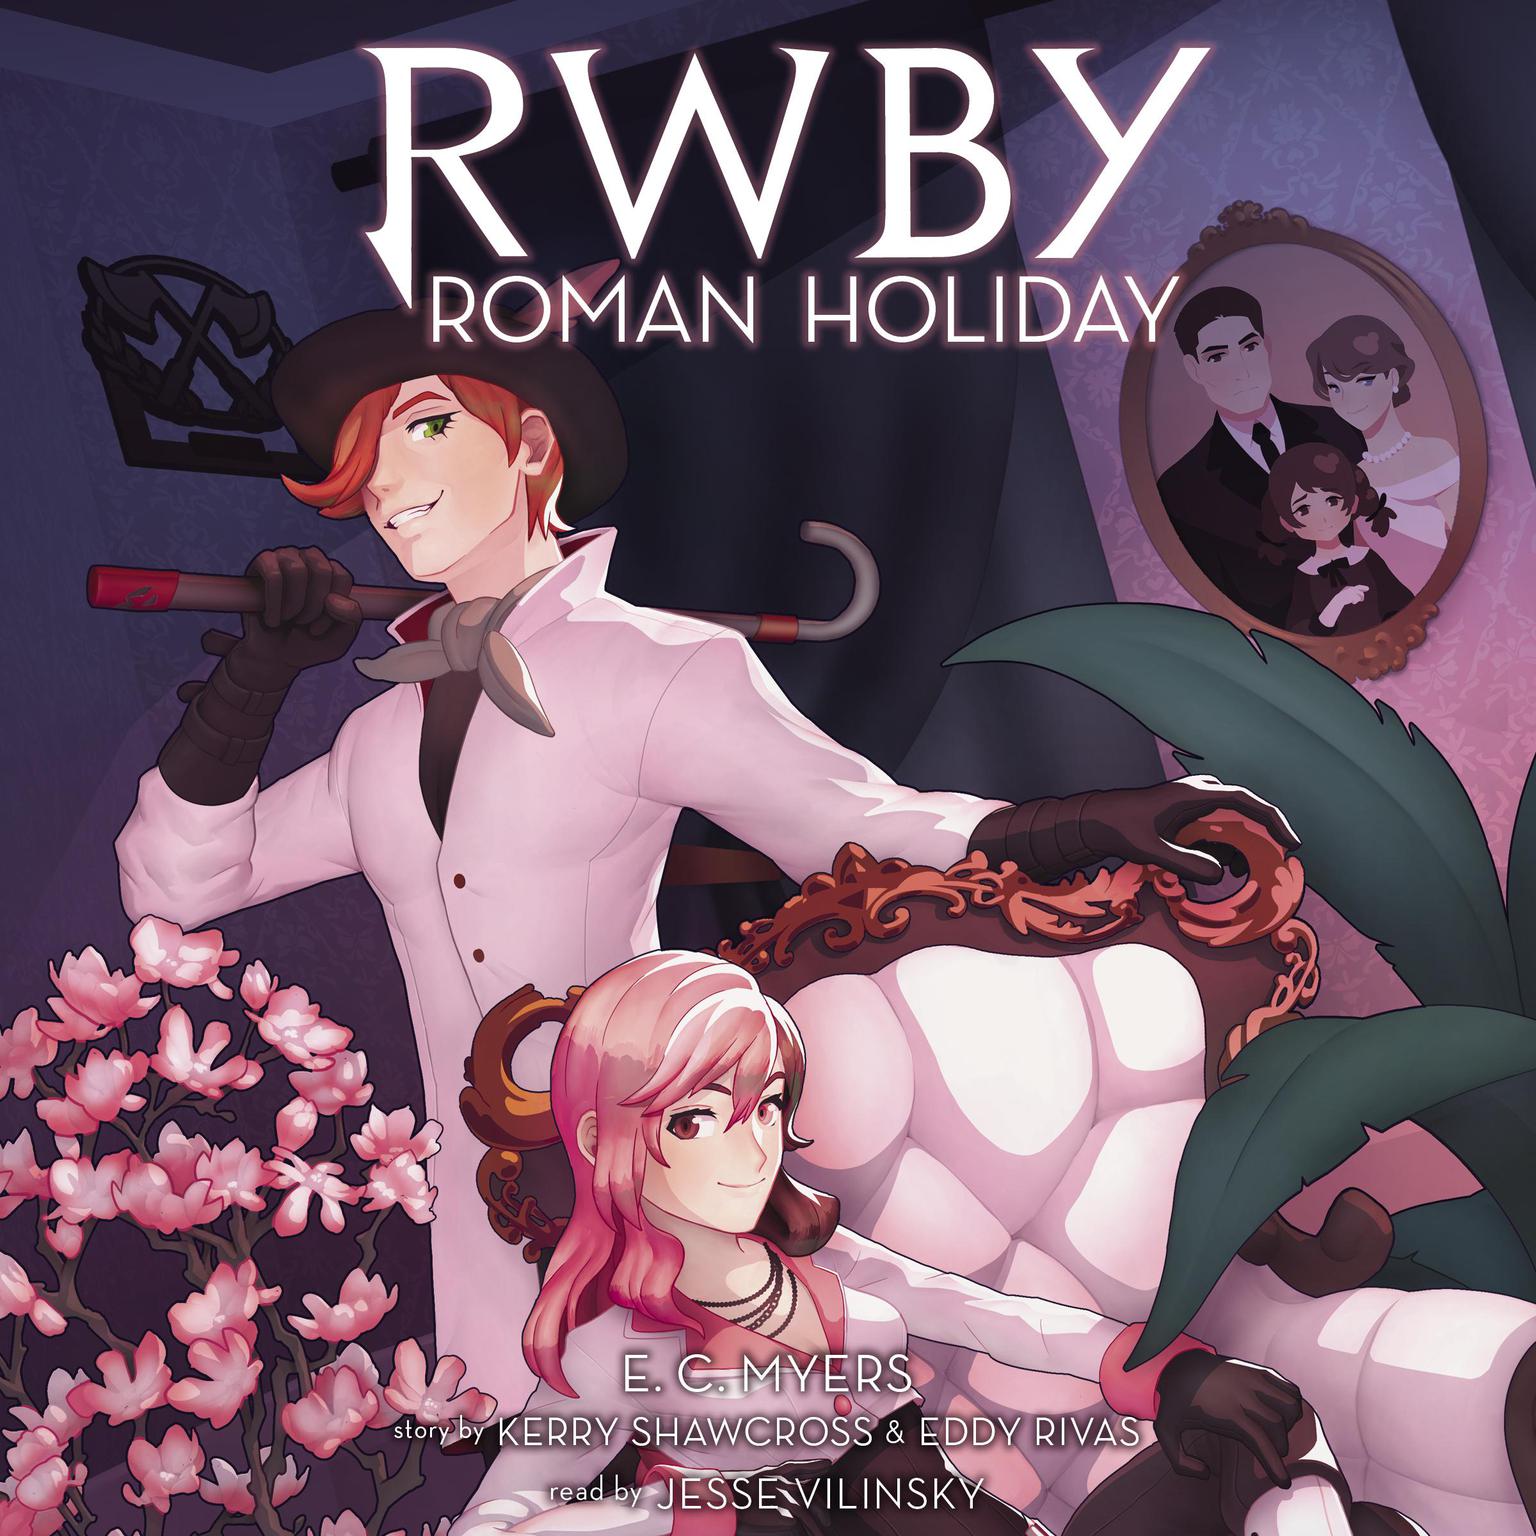 Roman Holiday: An AFK Book (RWBY, Book 3) Audiobook, by E. C. Myers